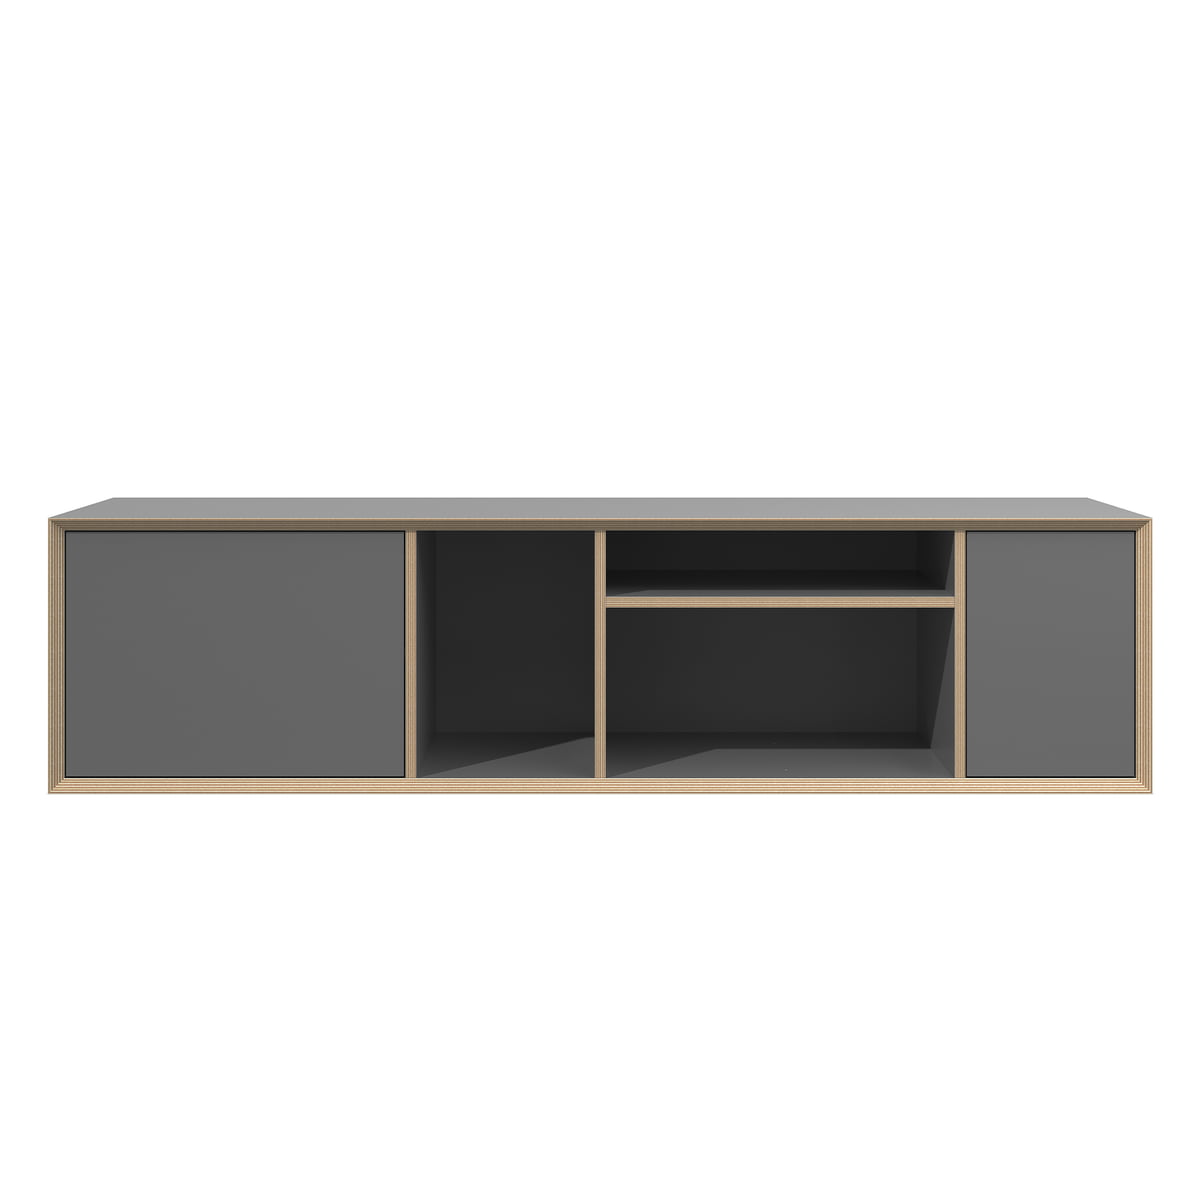 Müller Small Living - Vertiko Connox Sideboard | Wide